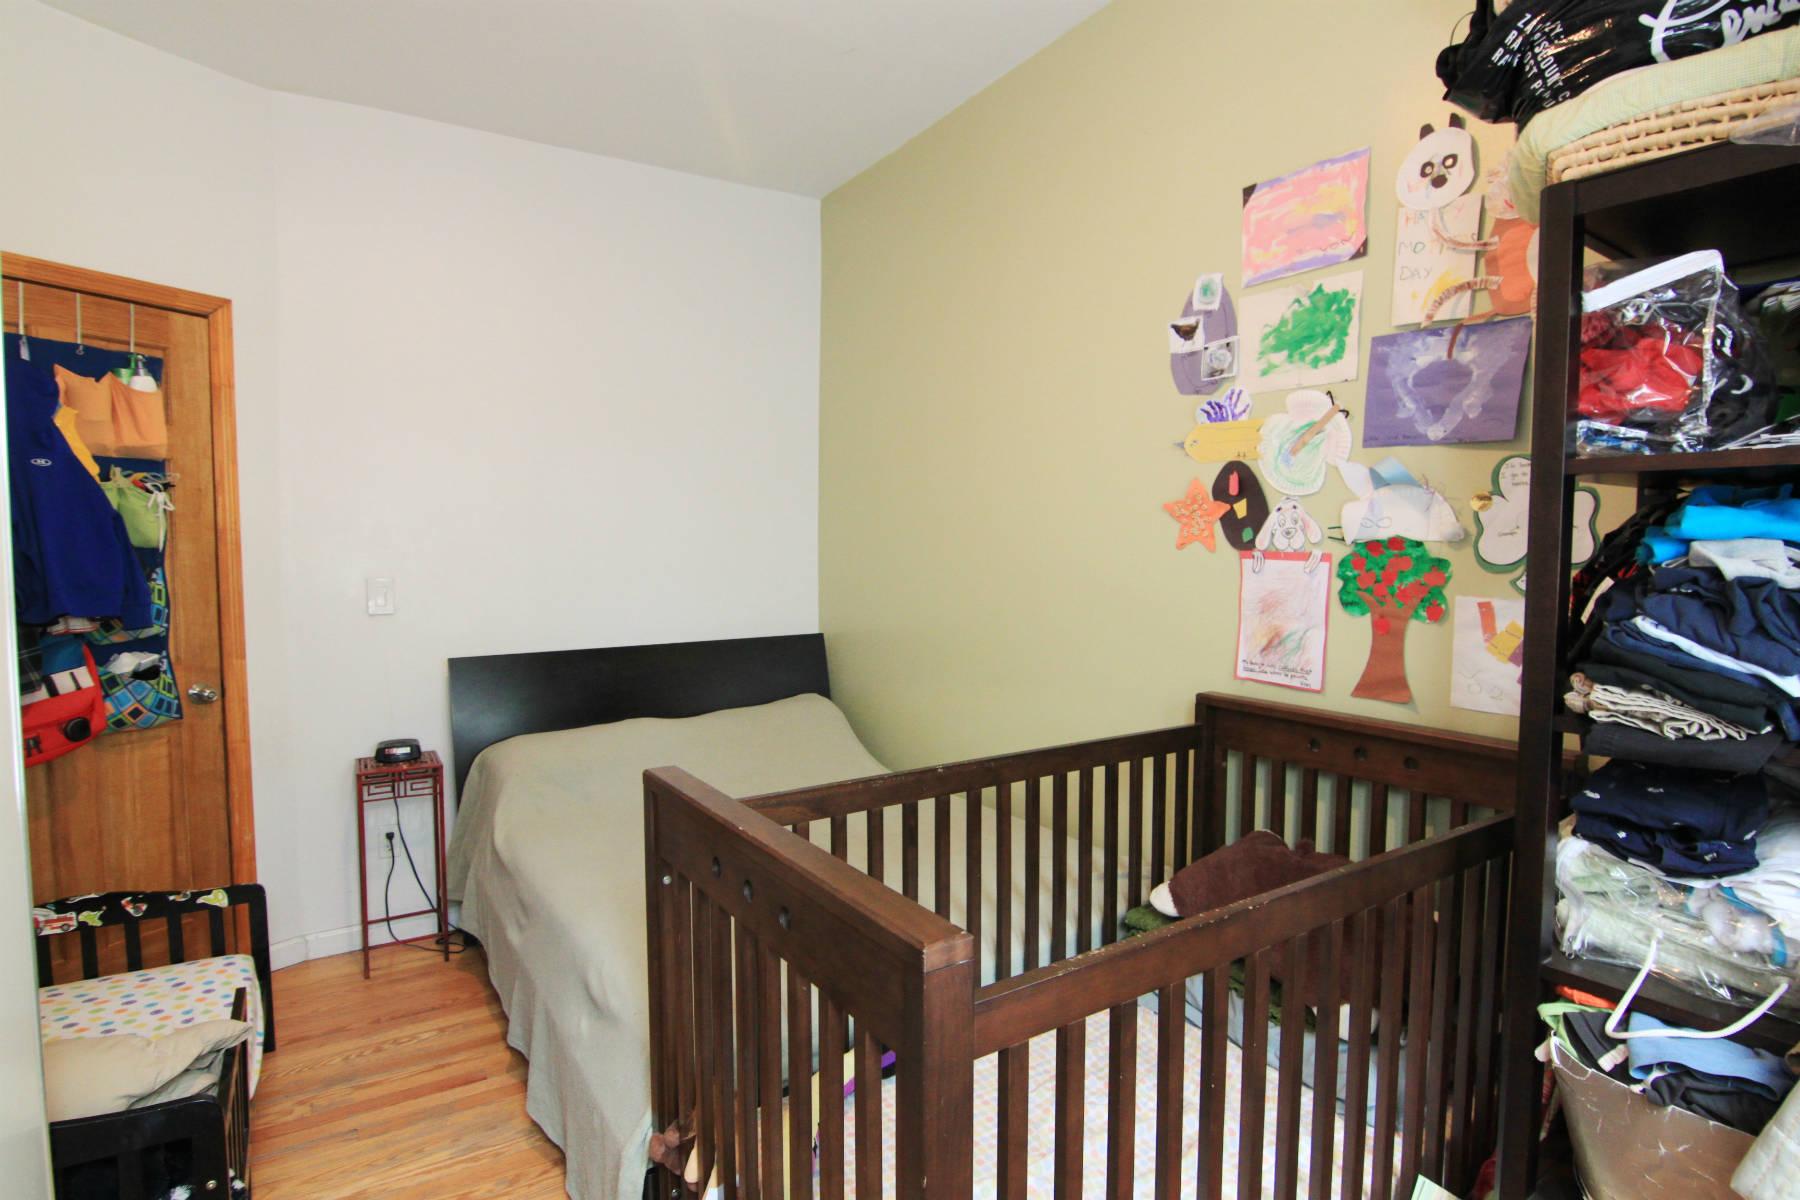 a view of kids room with toys and wooden floor